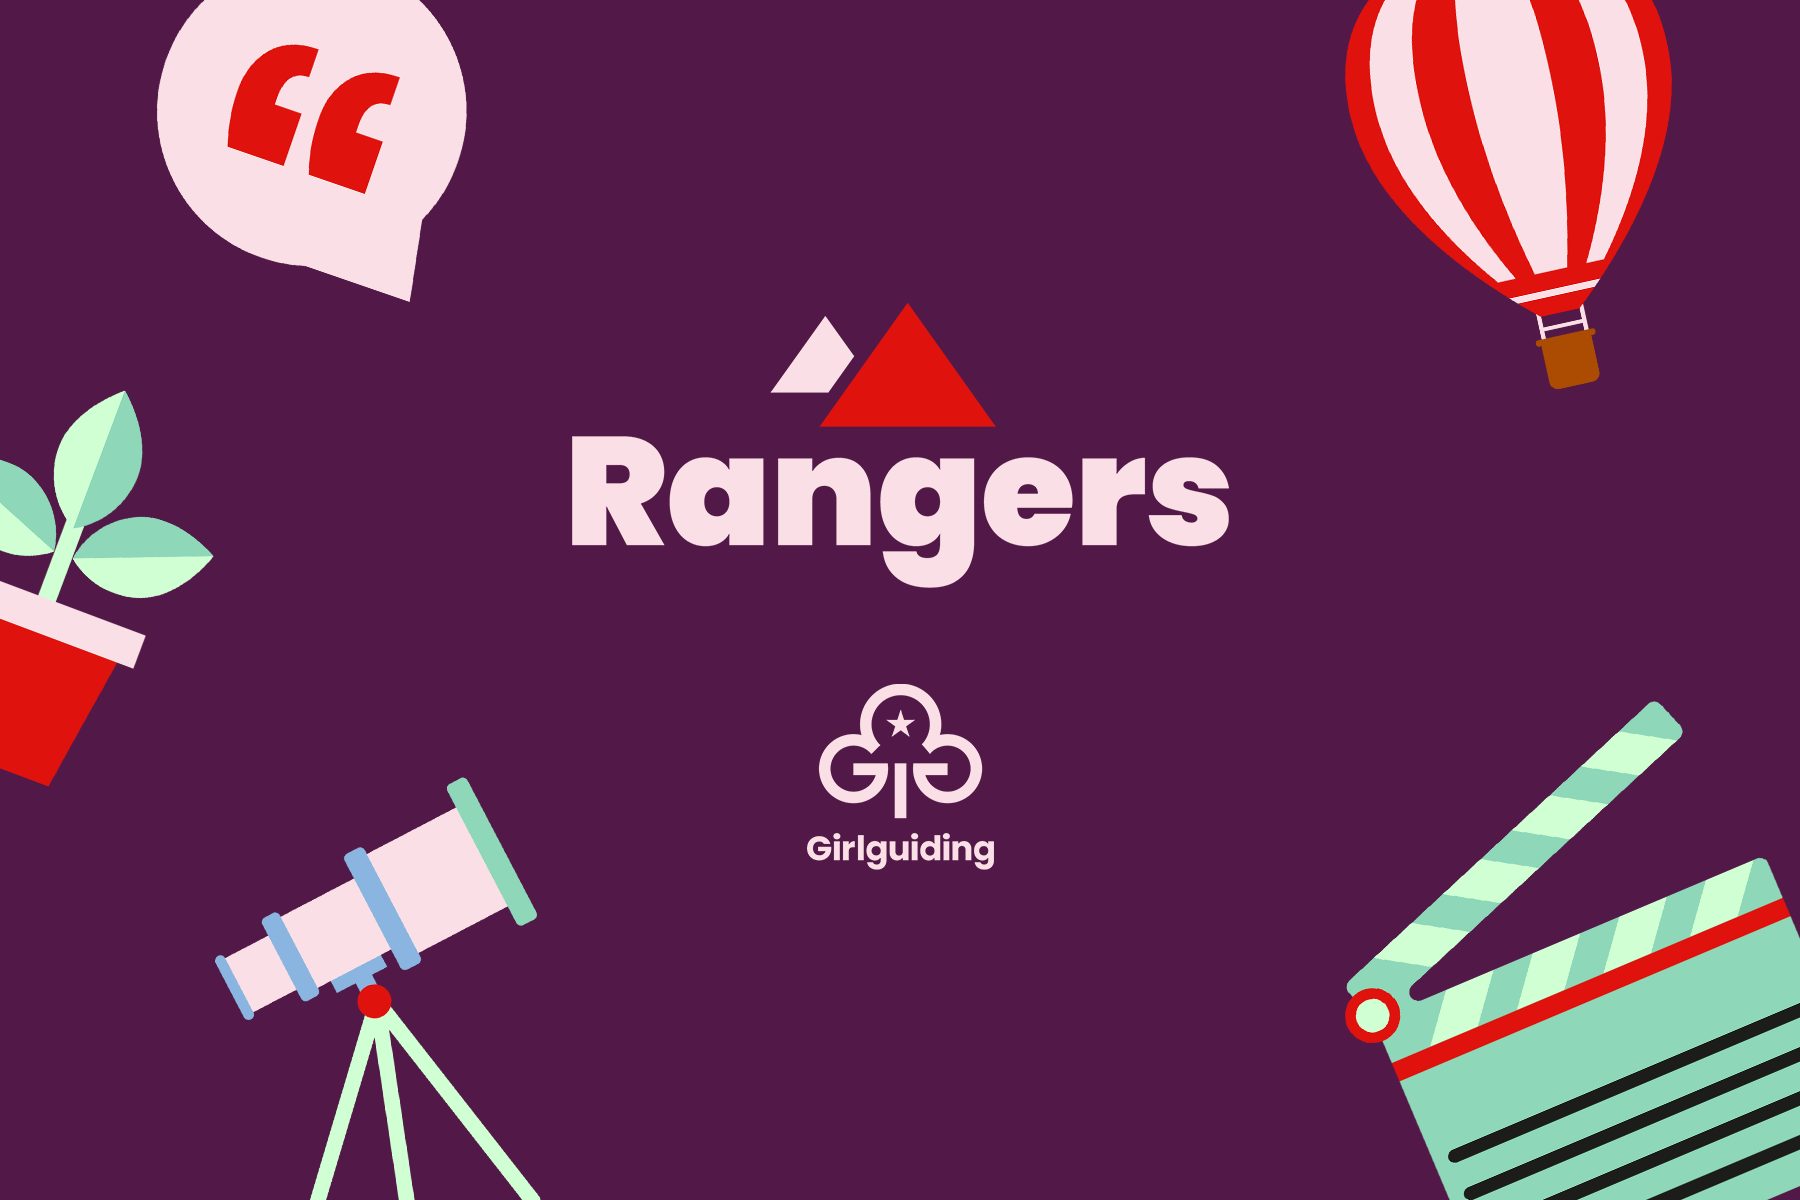 Graphic shows the new Rangers branding, featuring a pale pink wordmark with triangles in the shape of mountains above it, on a purple background